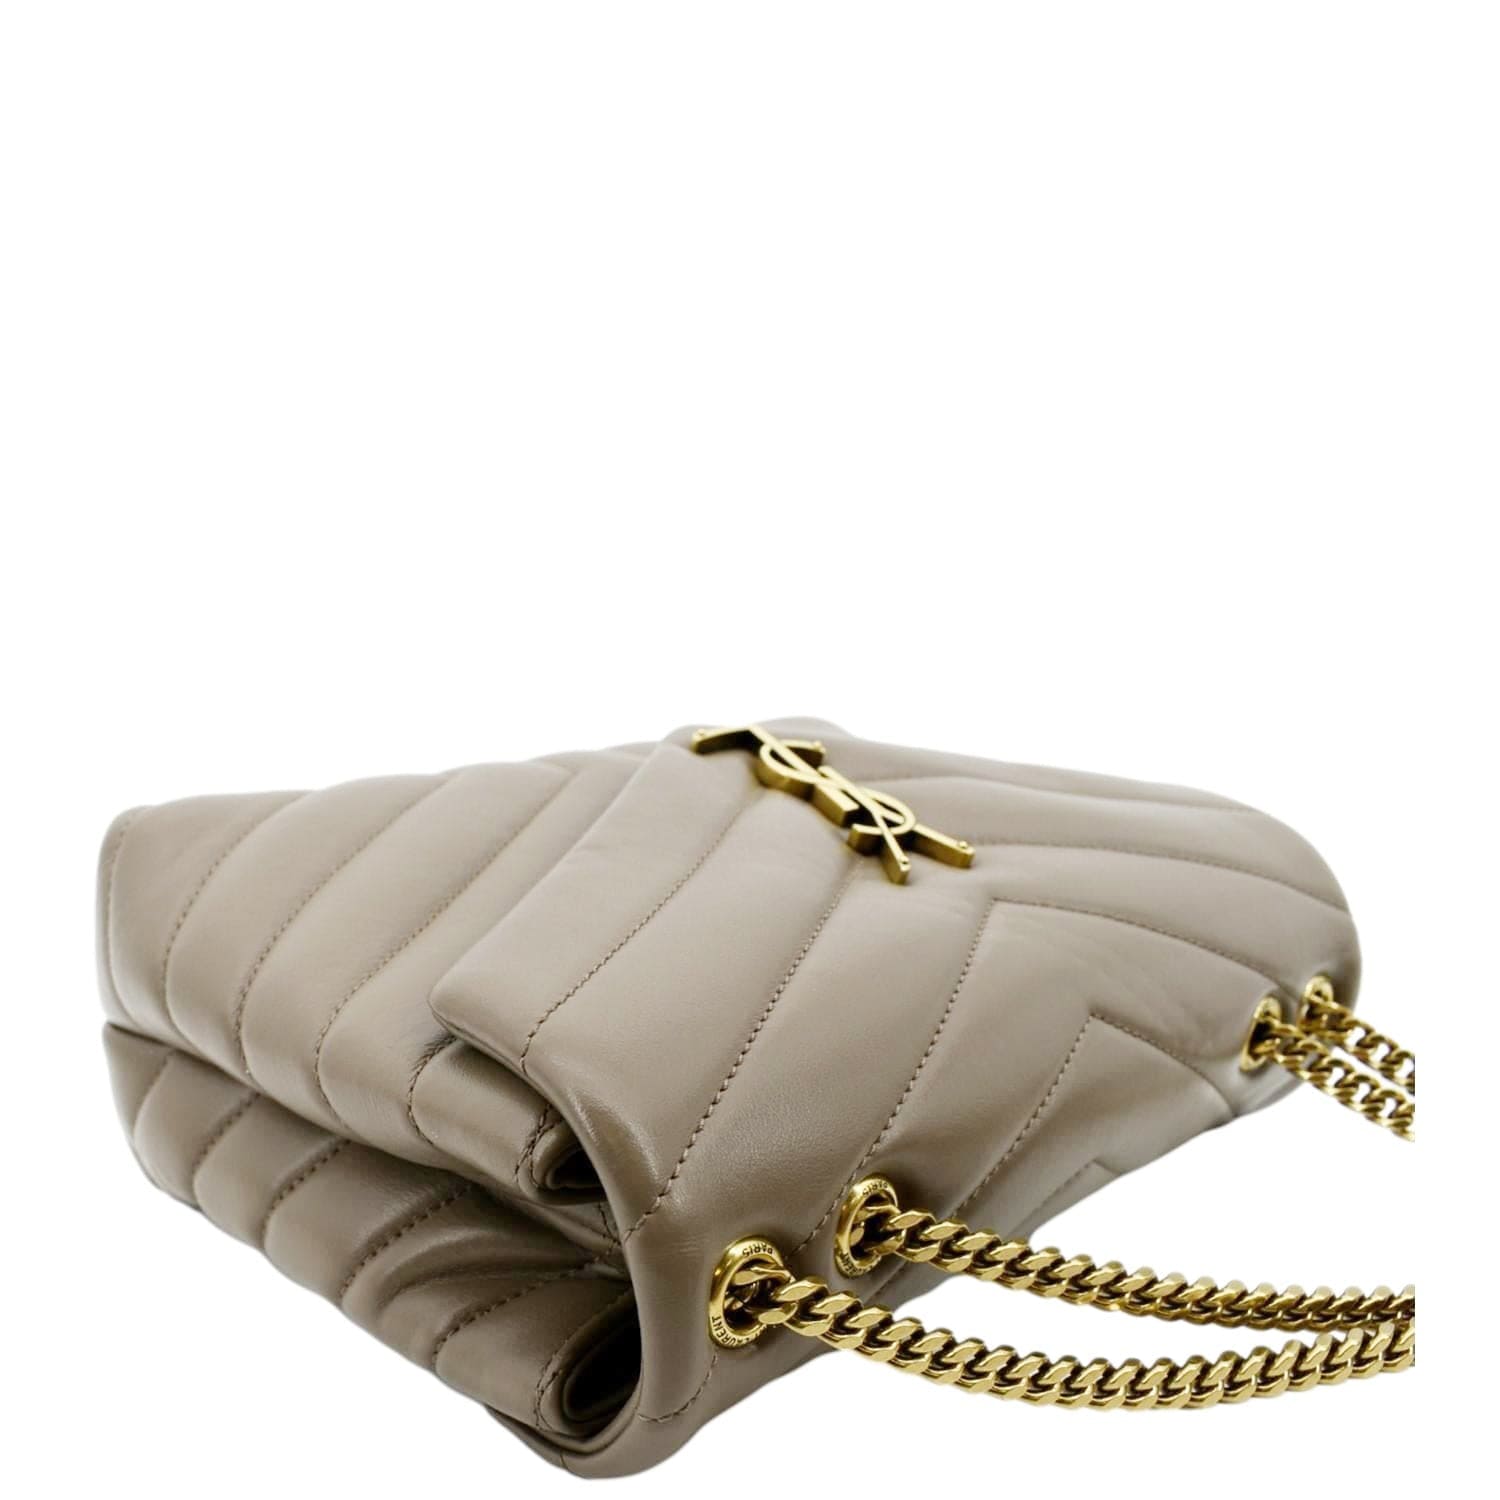 Saint Laurent Loulou Small Quilted Leather Shoulder Bag In Beige